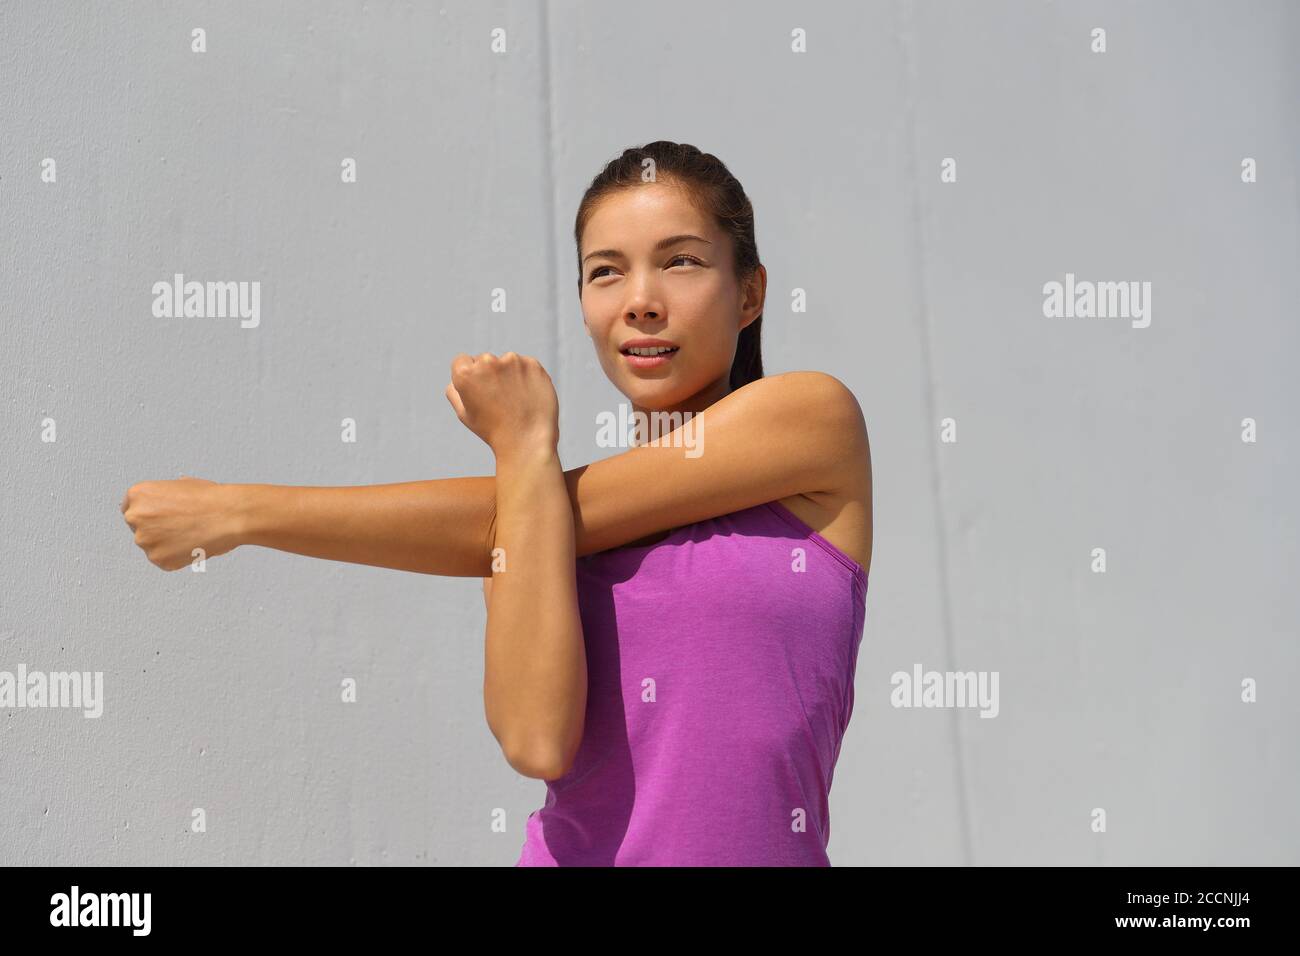 Fitness Asian runner doing warm-up stretching arms before jogging workout outdoor. Run race girl getting ready for running competition Stock Photo